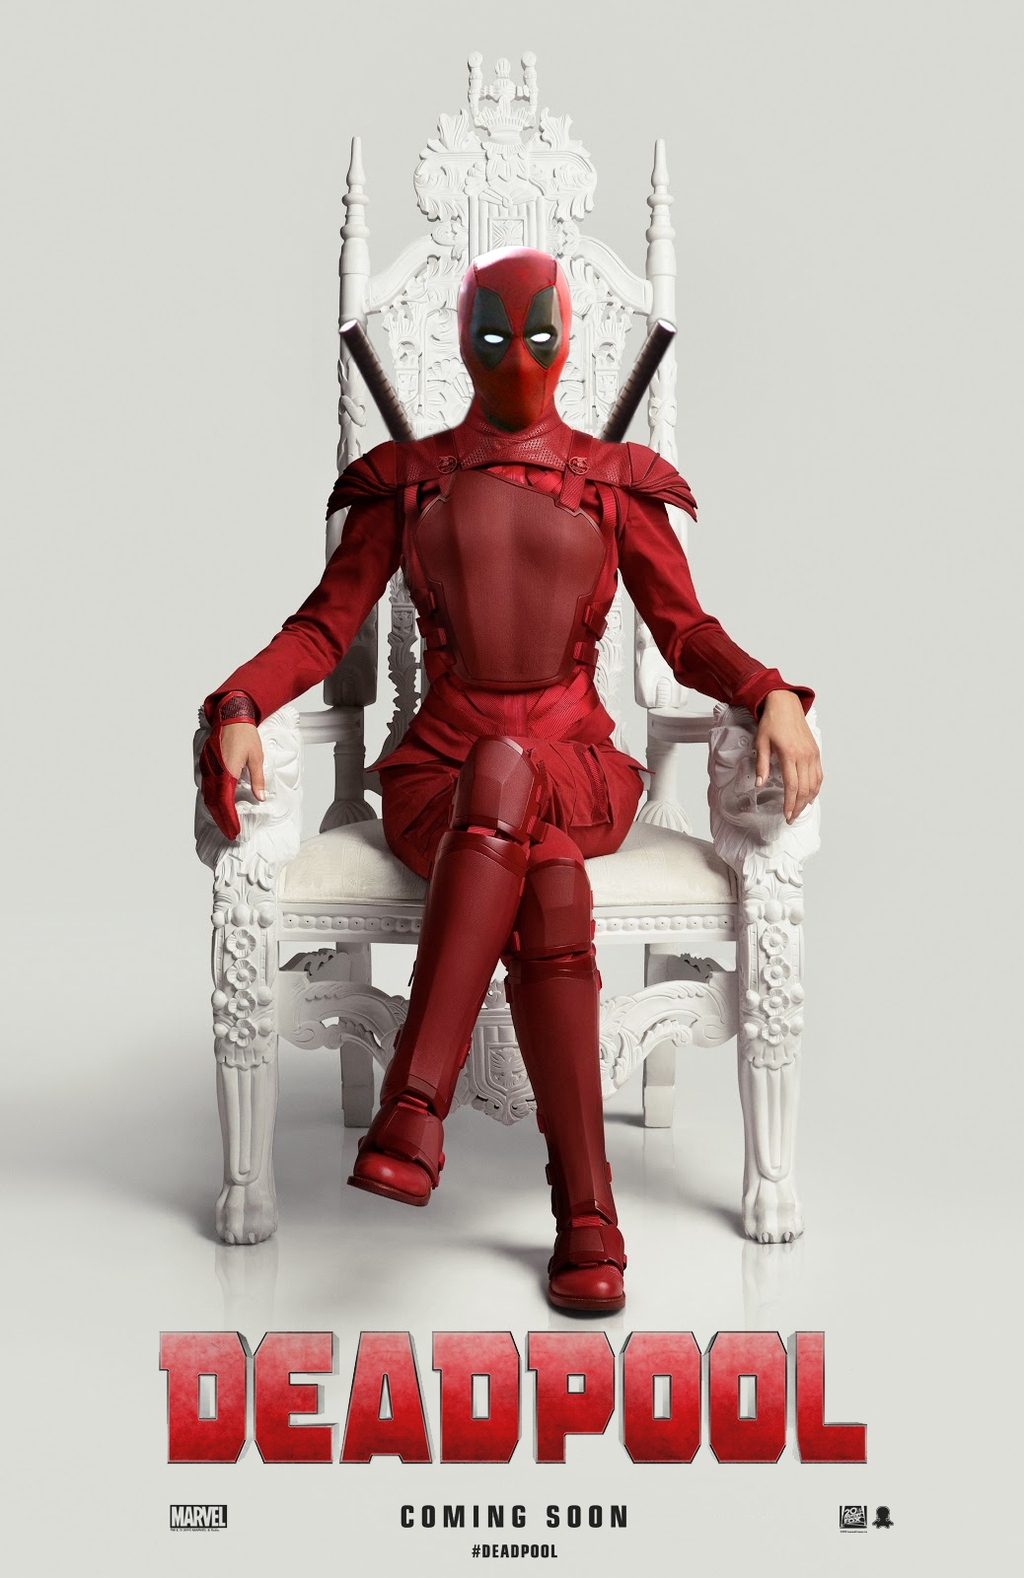 Ryan Gosling as deadpool, handsome face, unmasked, no | Stable Diffusion